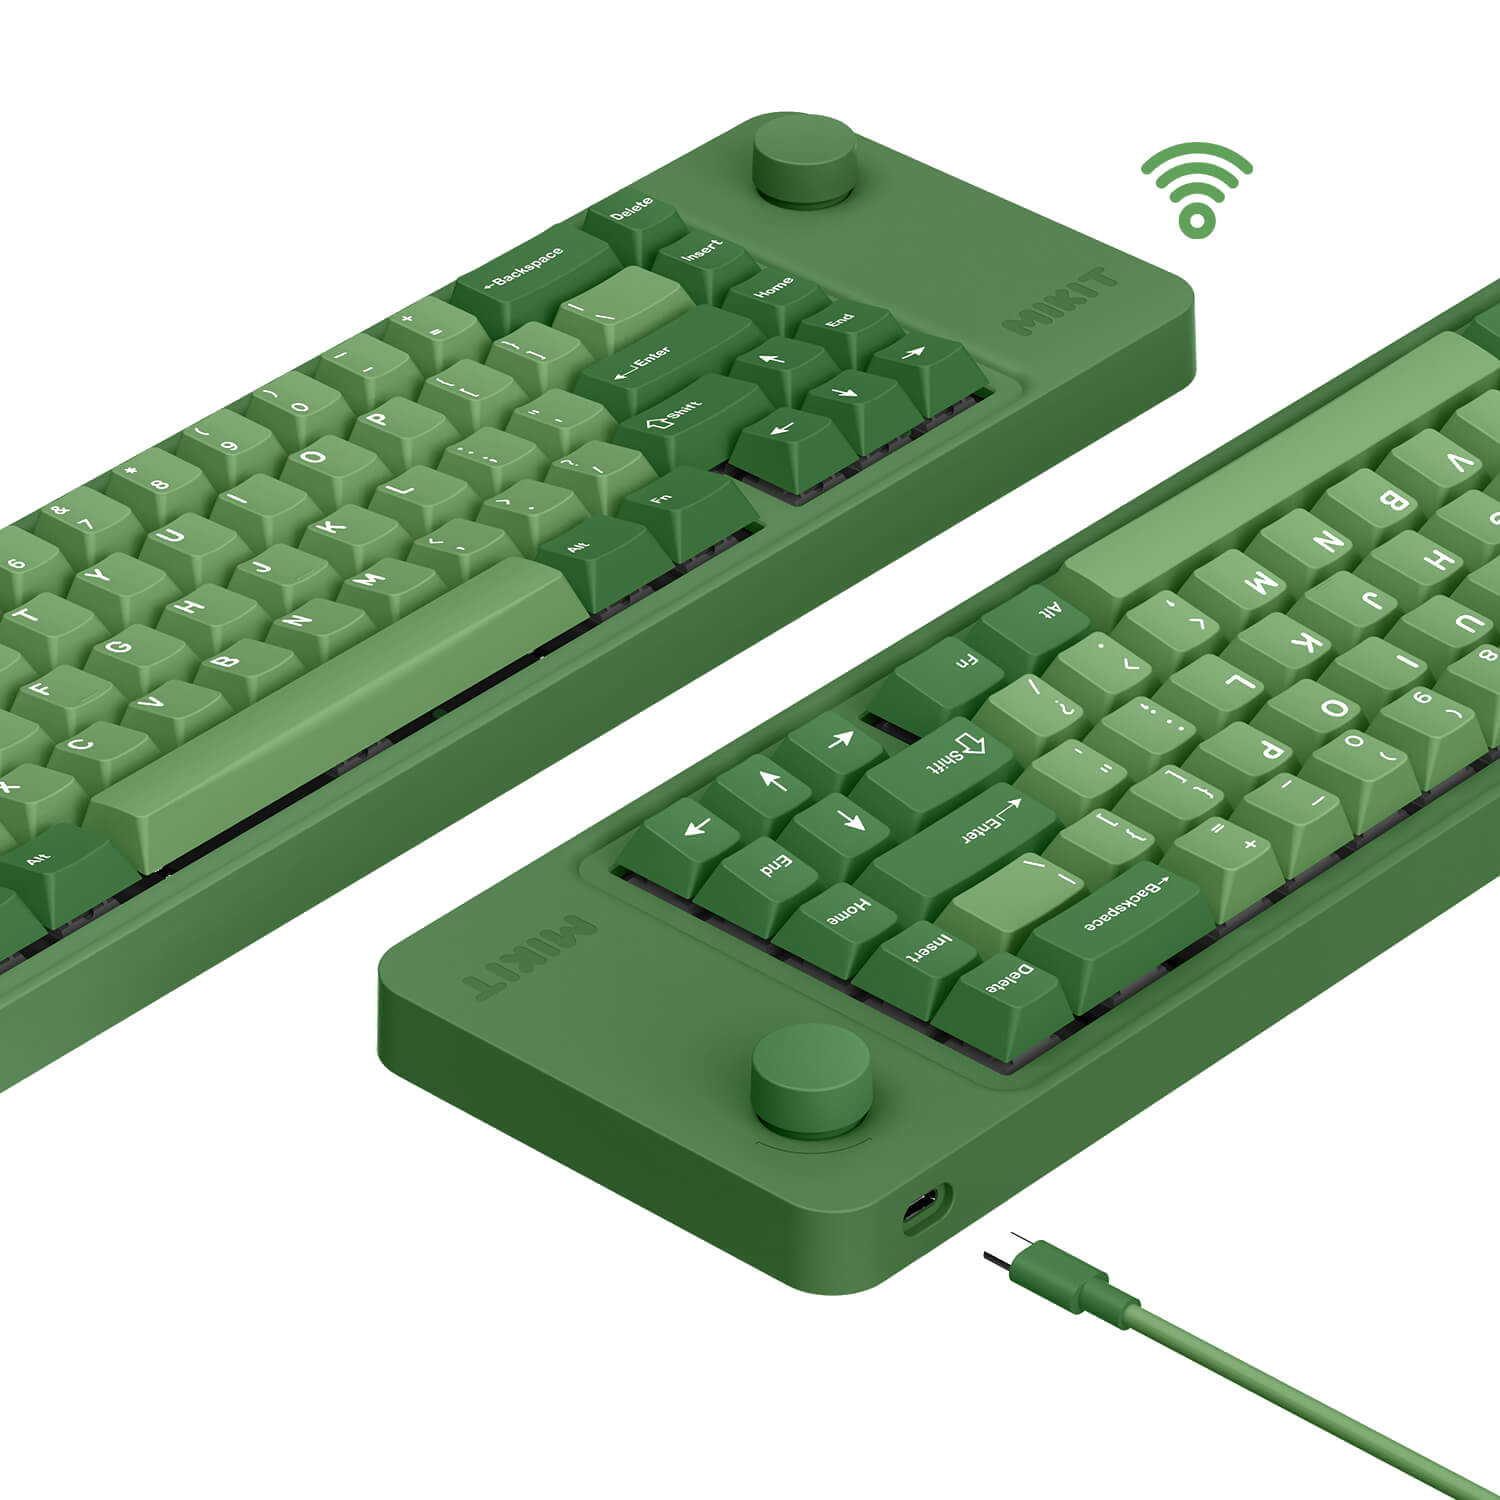 Ultra-Compact 65% Keyboard Layout With A Multi-Function Knob